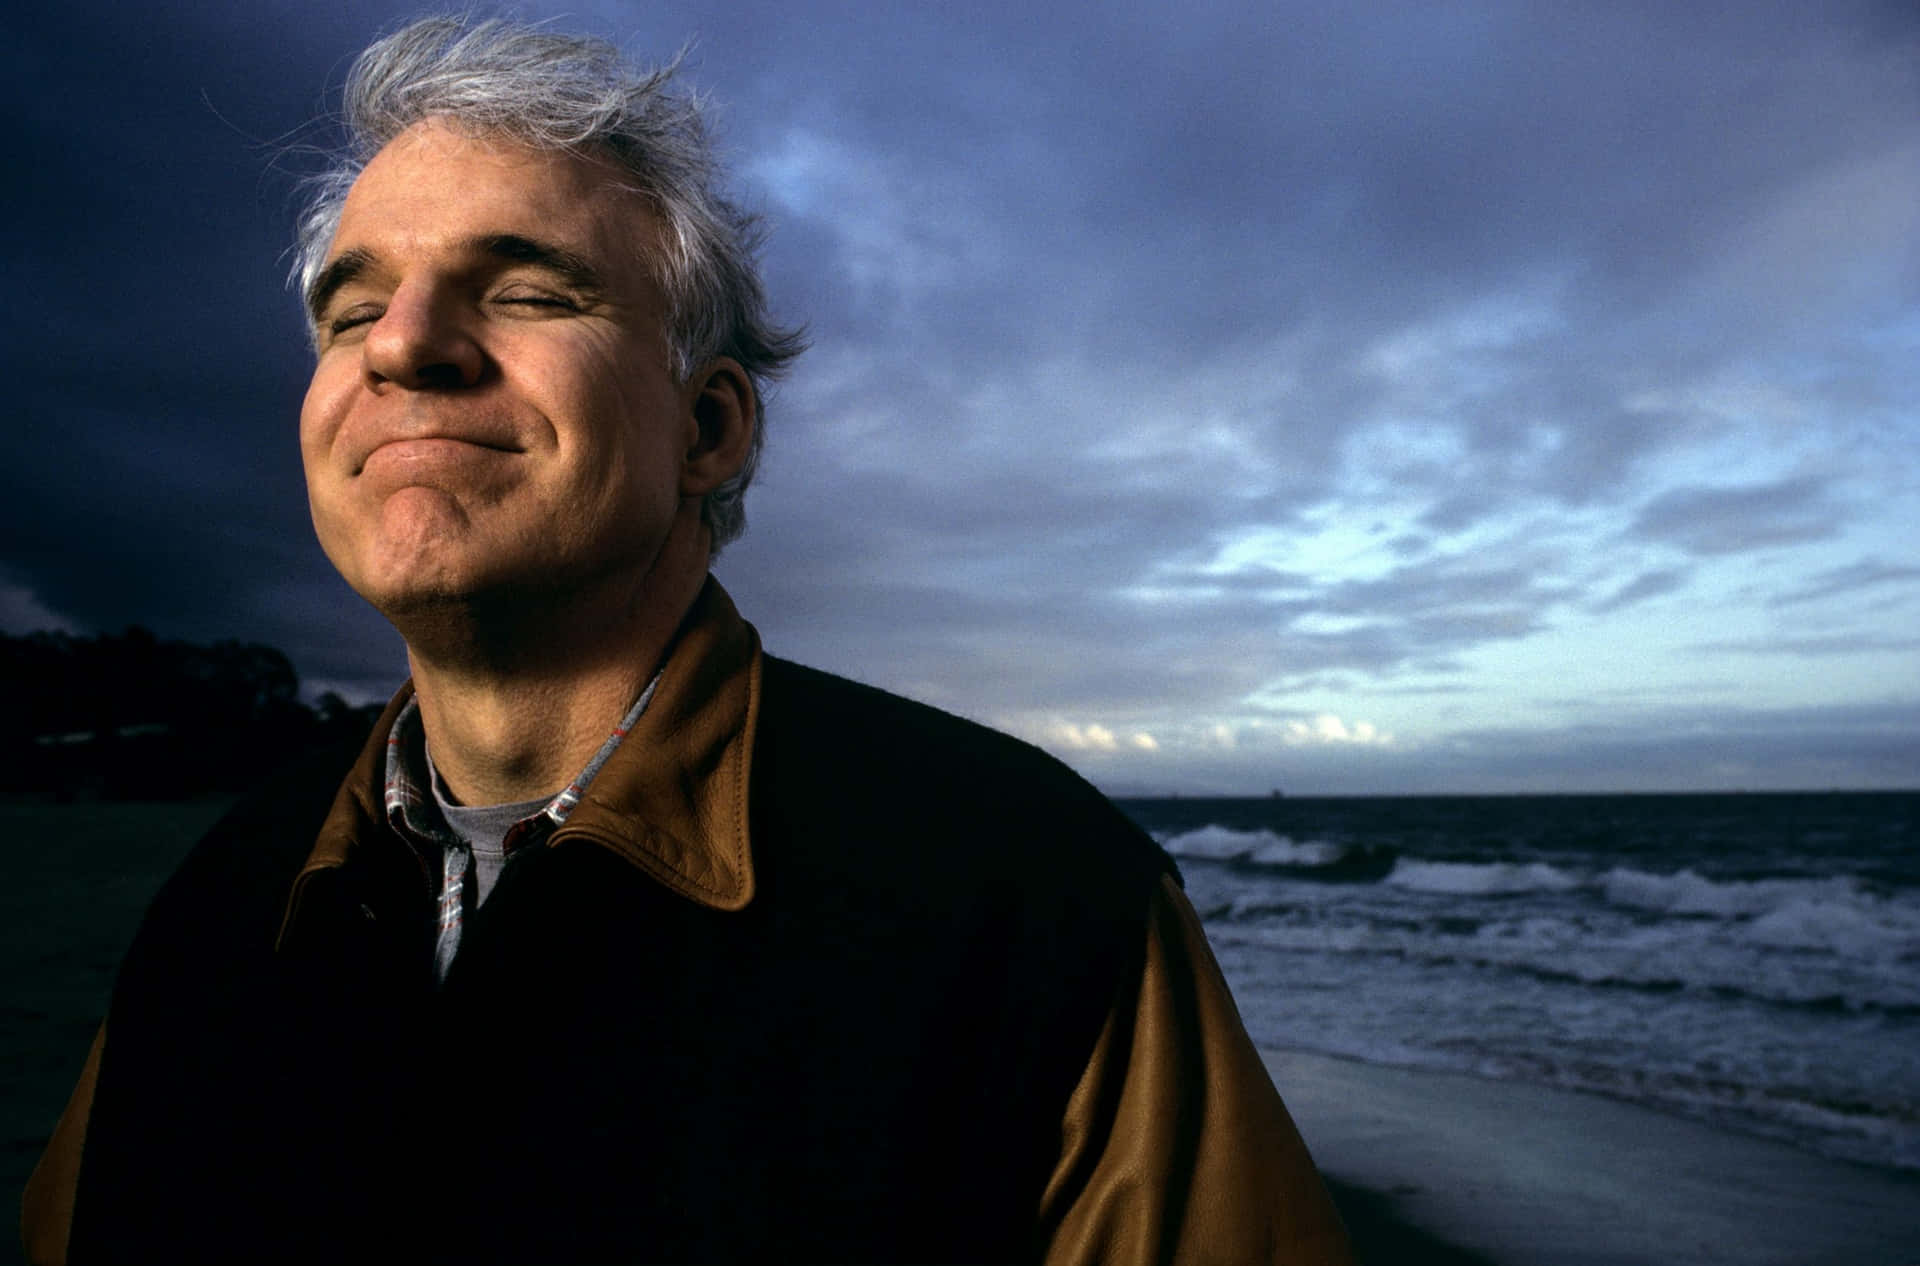 An exceptional display of charm and charisma - Steve Martin Wallpaper